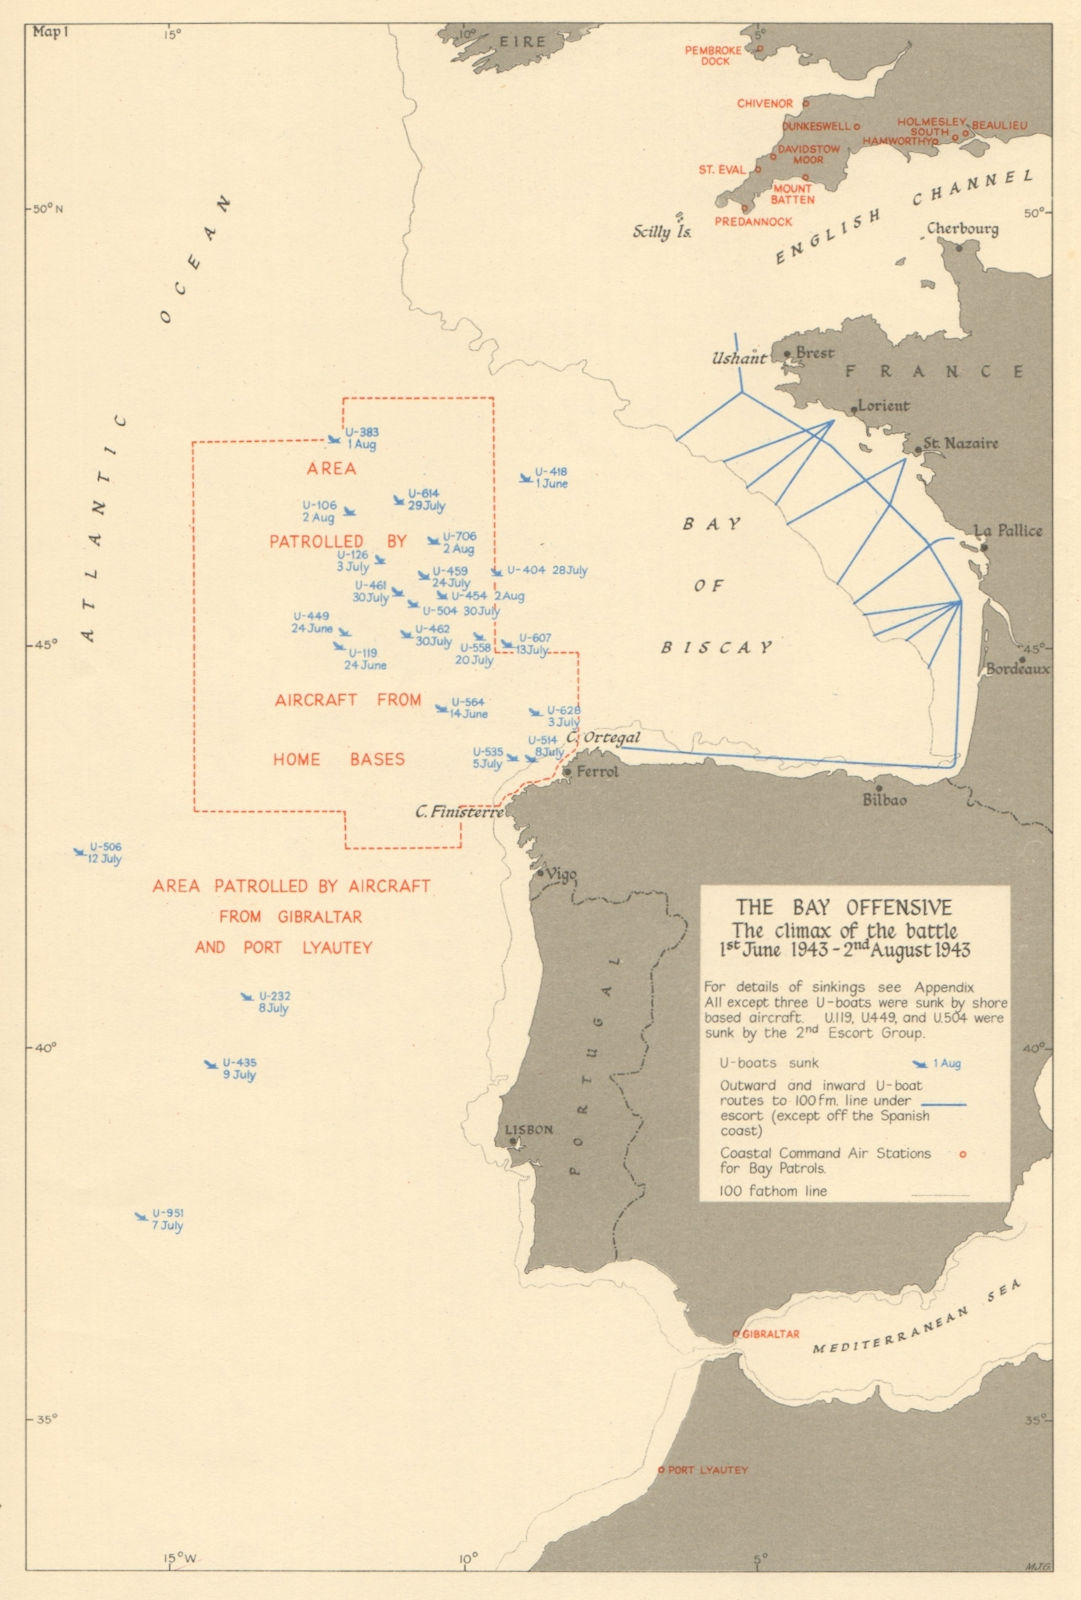 Associate Product Bay of Biscay. U-Boat sinkings. Battle of the Atlantic June-July 1943 1954 map